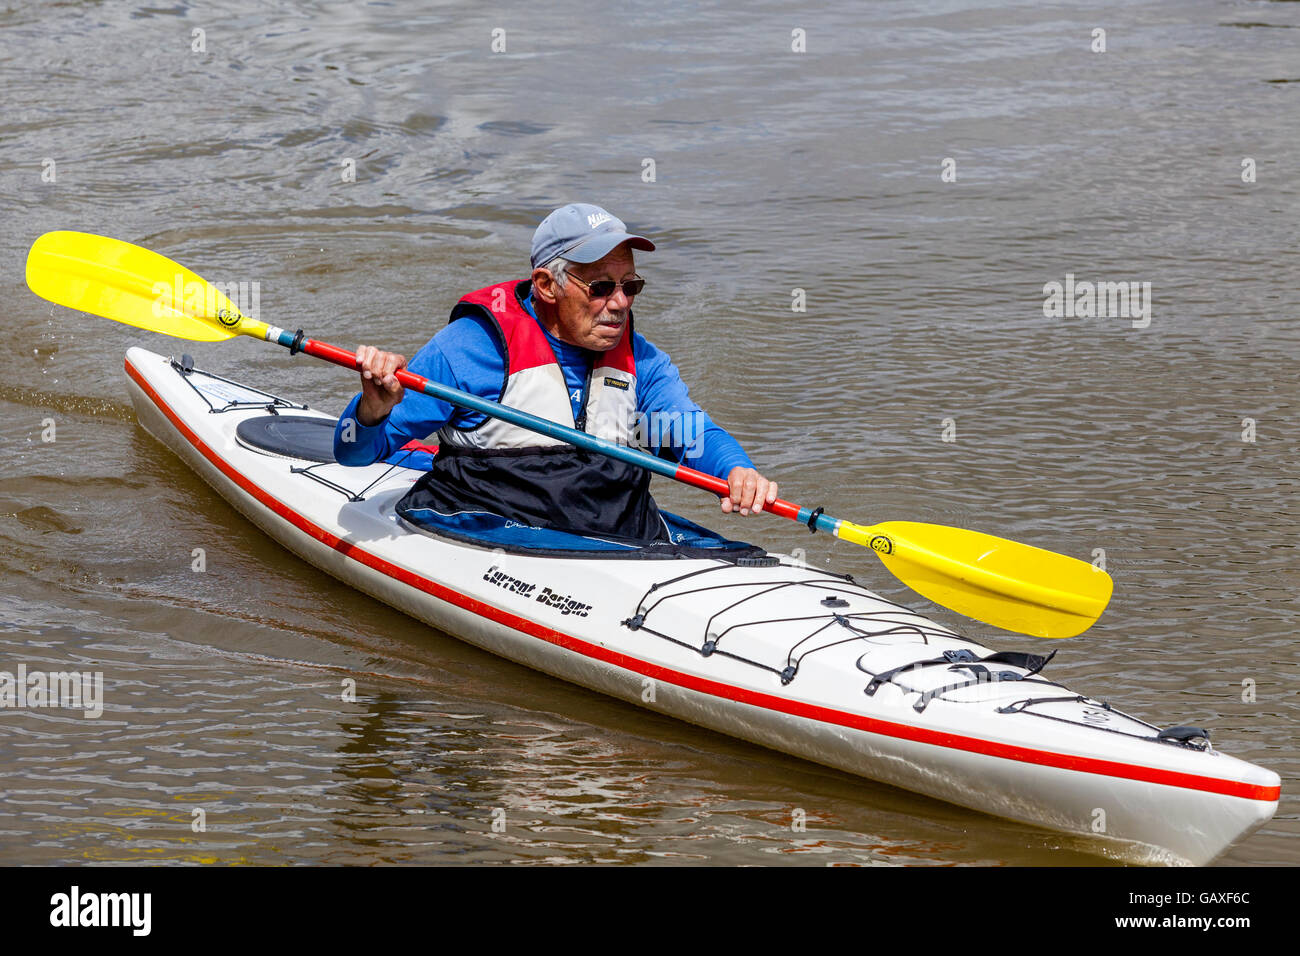 An Elderly Man Kayaking On The River Ouse, Lewes, Sussex, UK Stock Photo